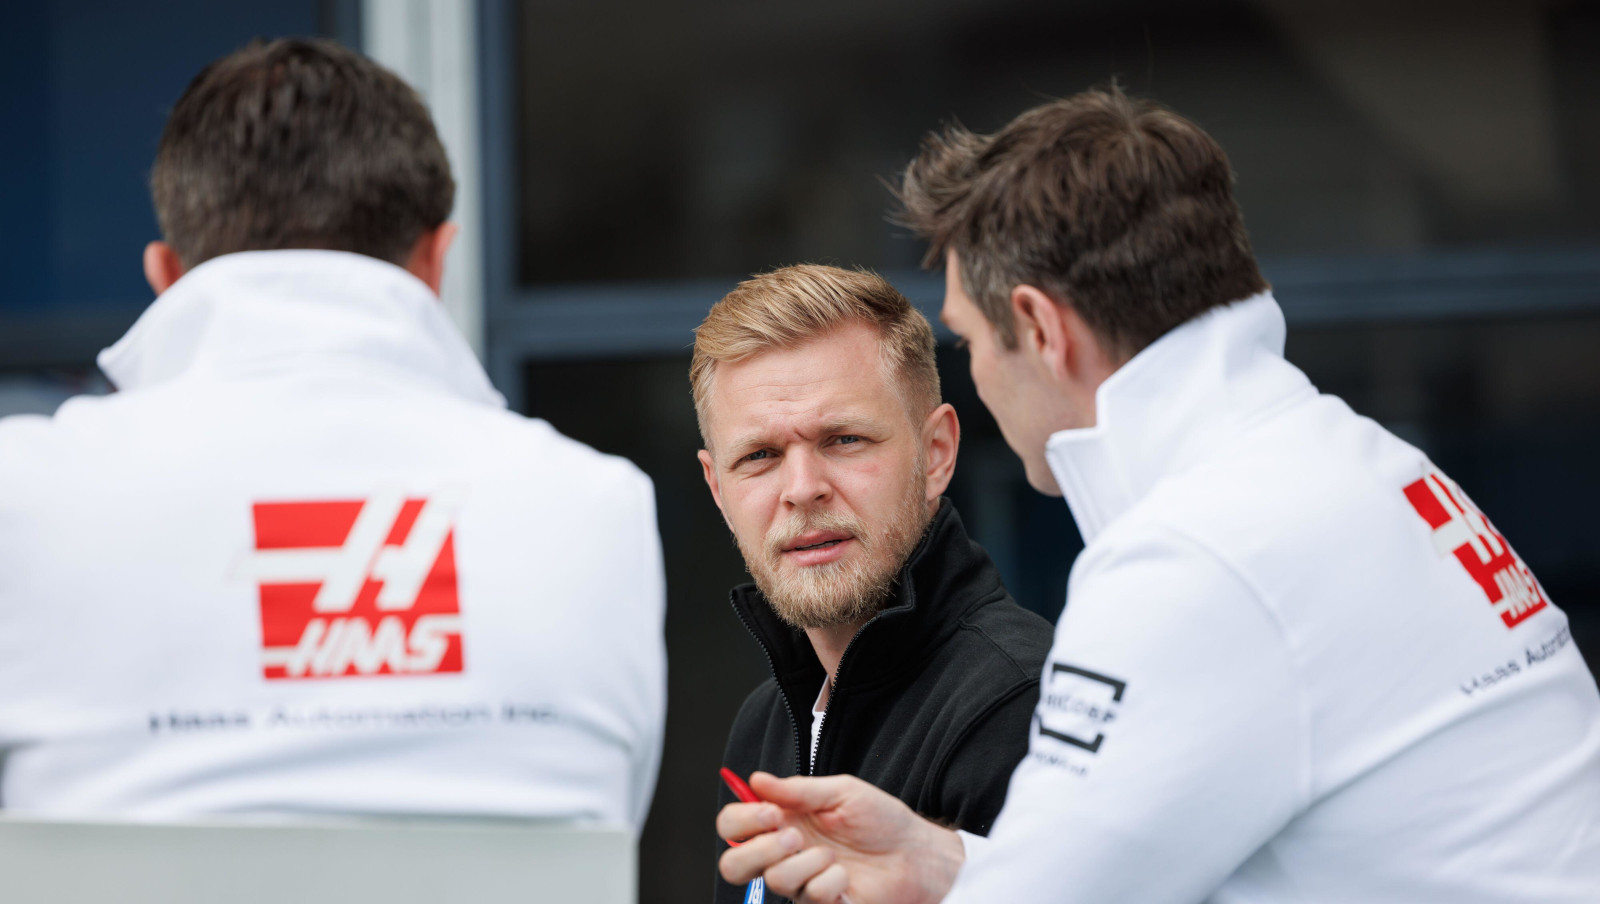 Kevin Magnussen speaking with Haas personnel. Australia April 2022